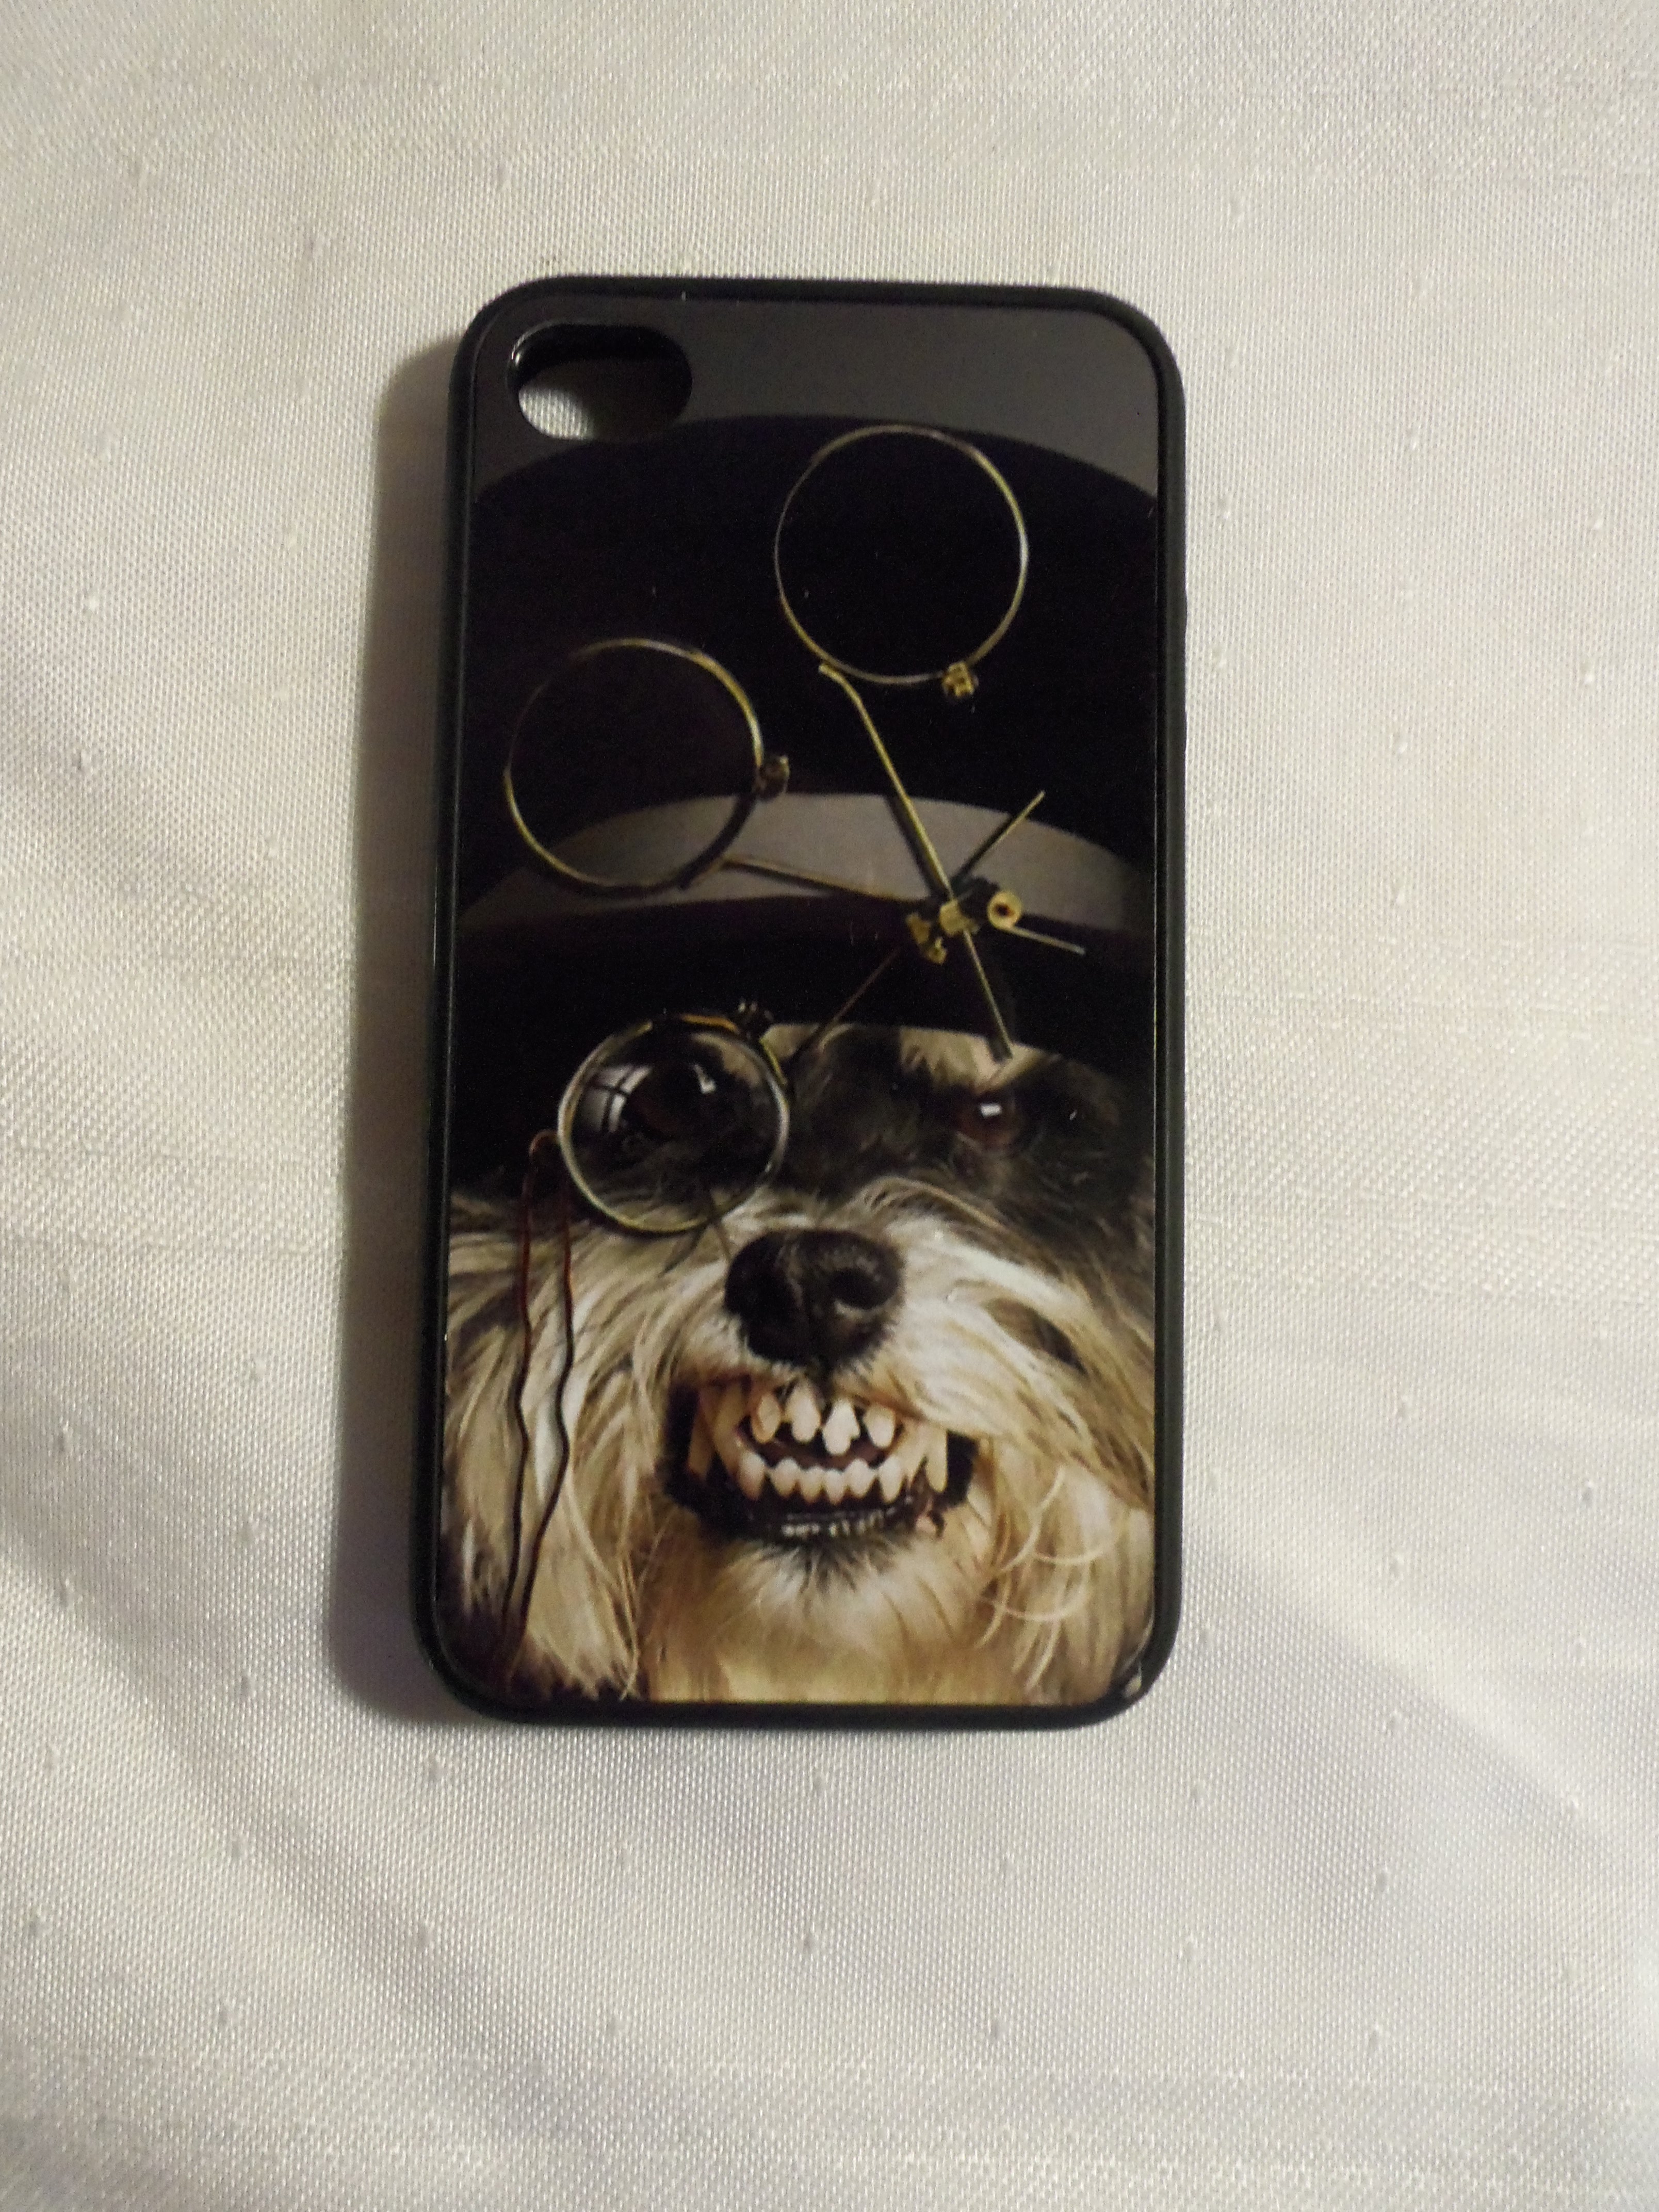 Iphone cover made with sublimation printing